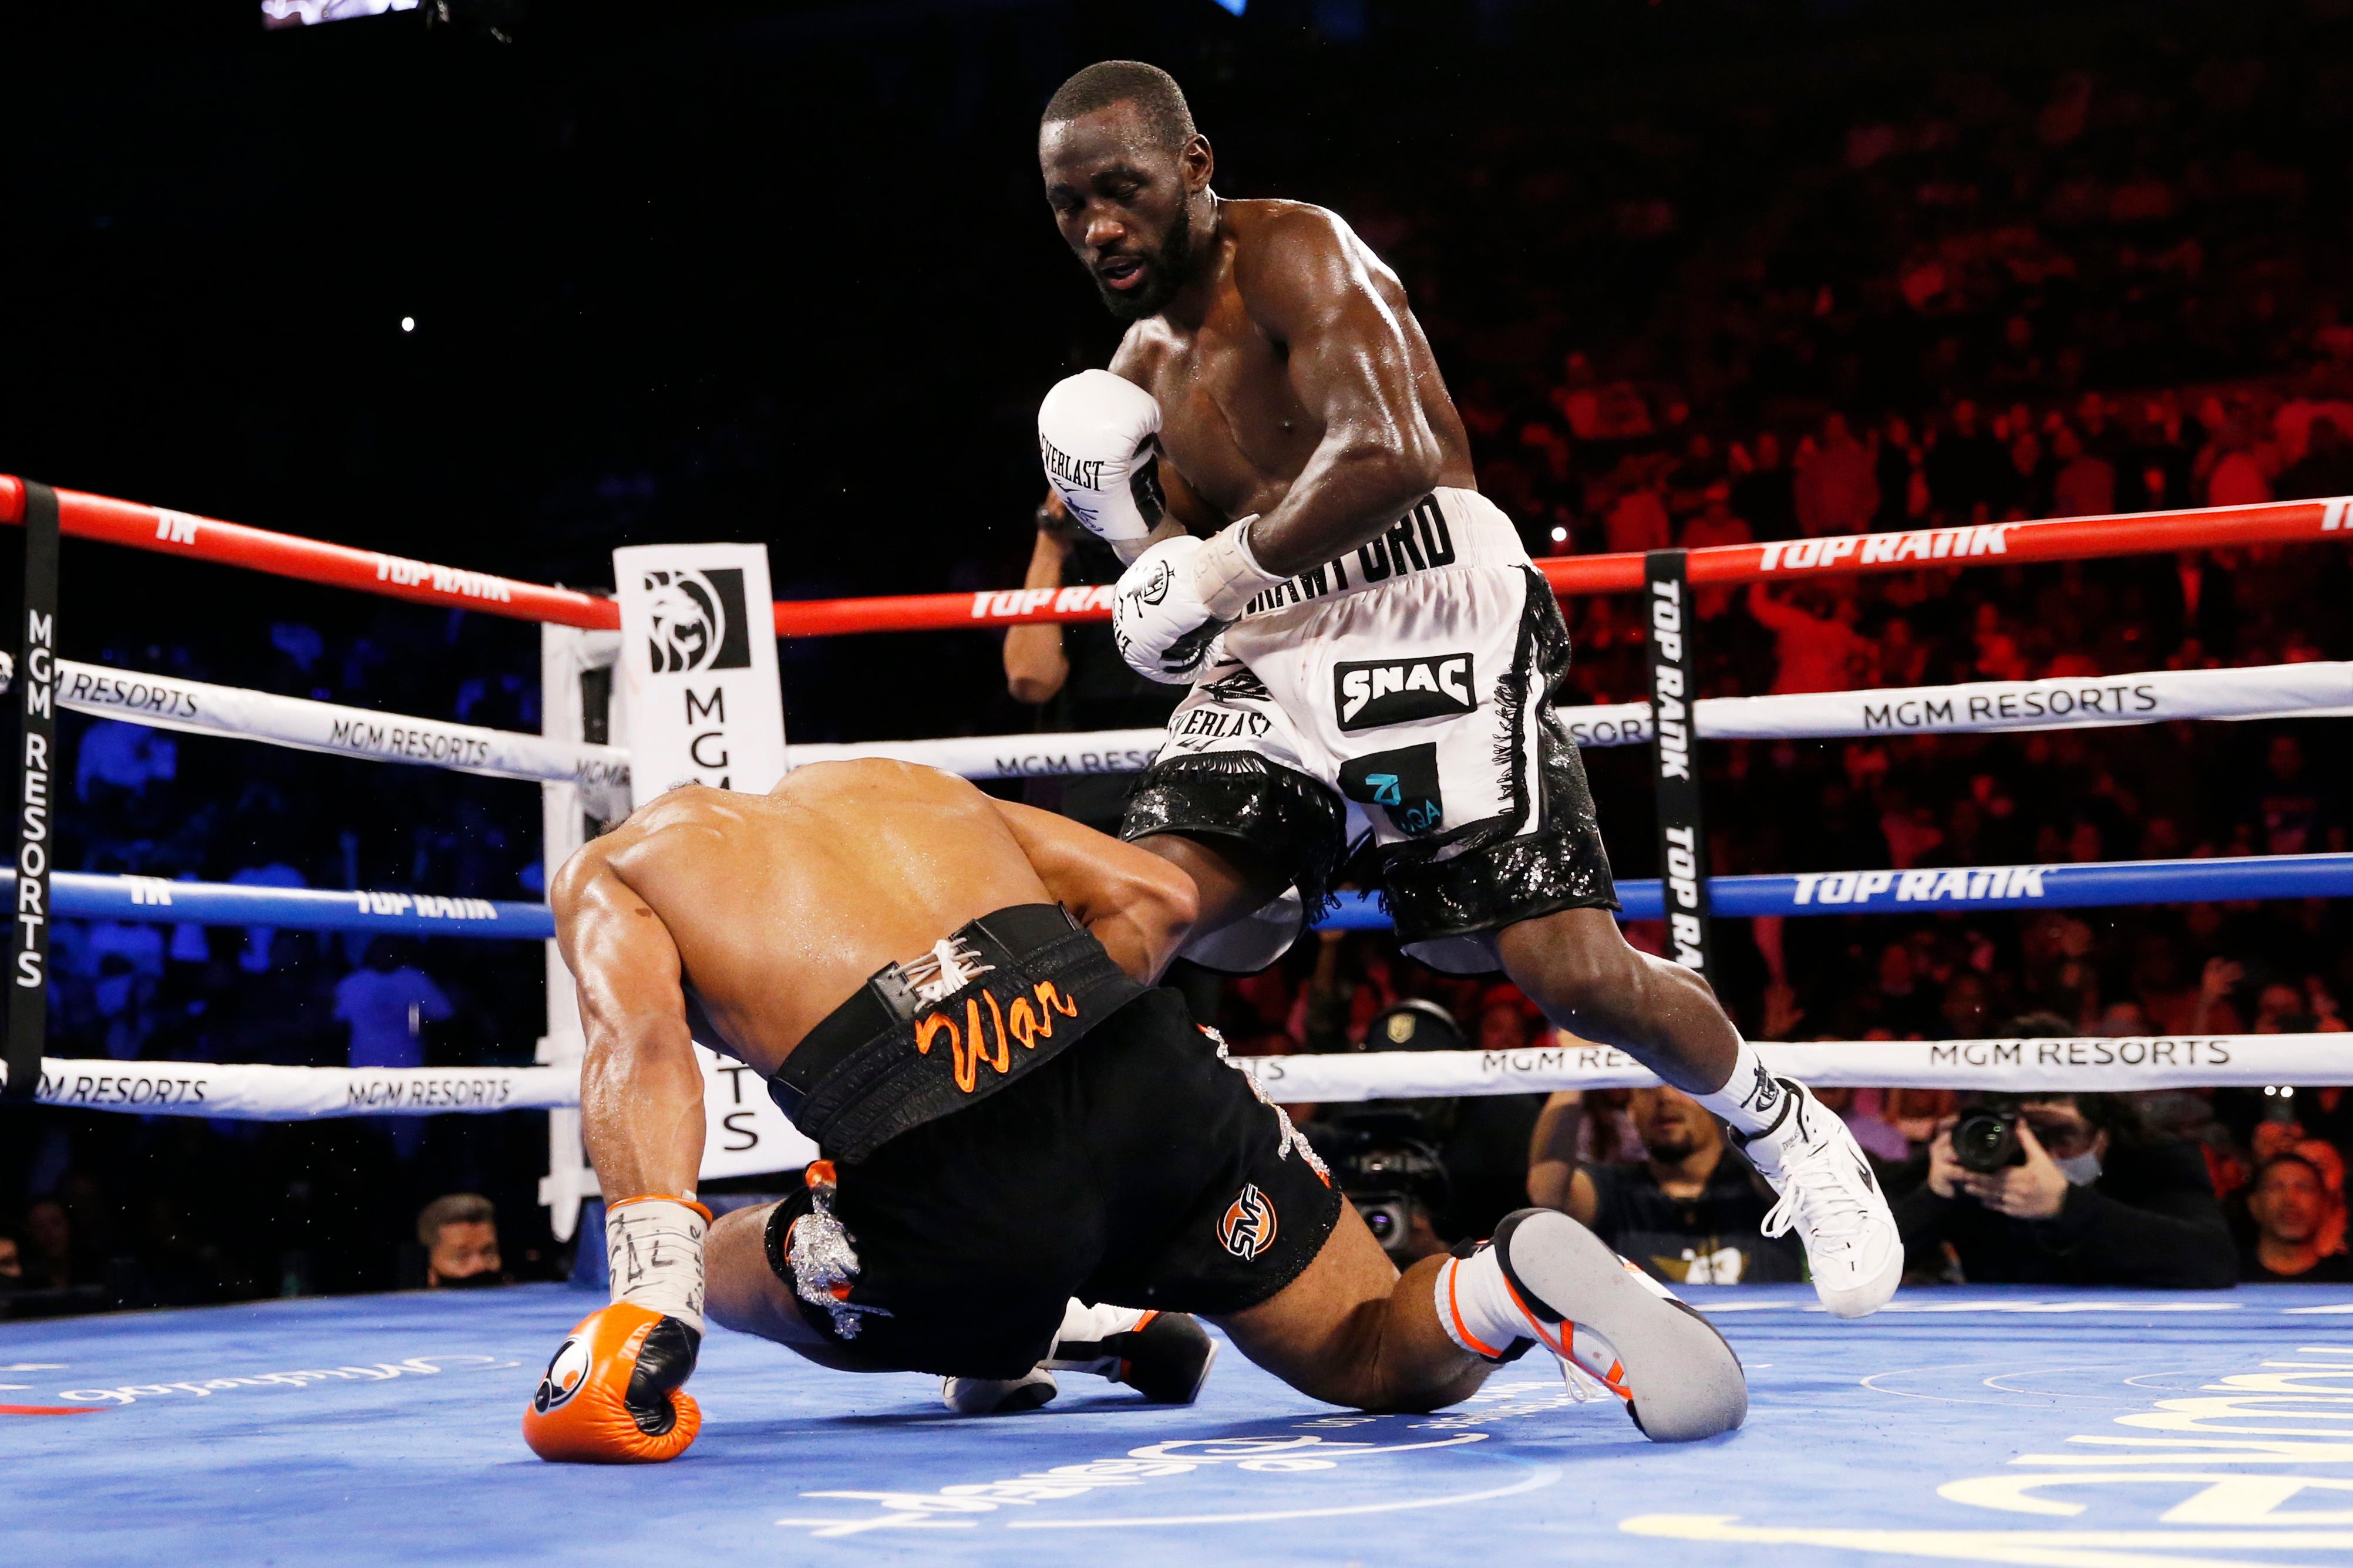 Terence Crawford stopped Shawn Porter in his most recent fight